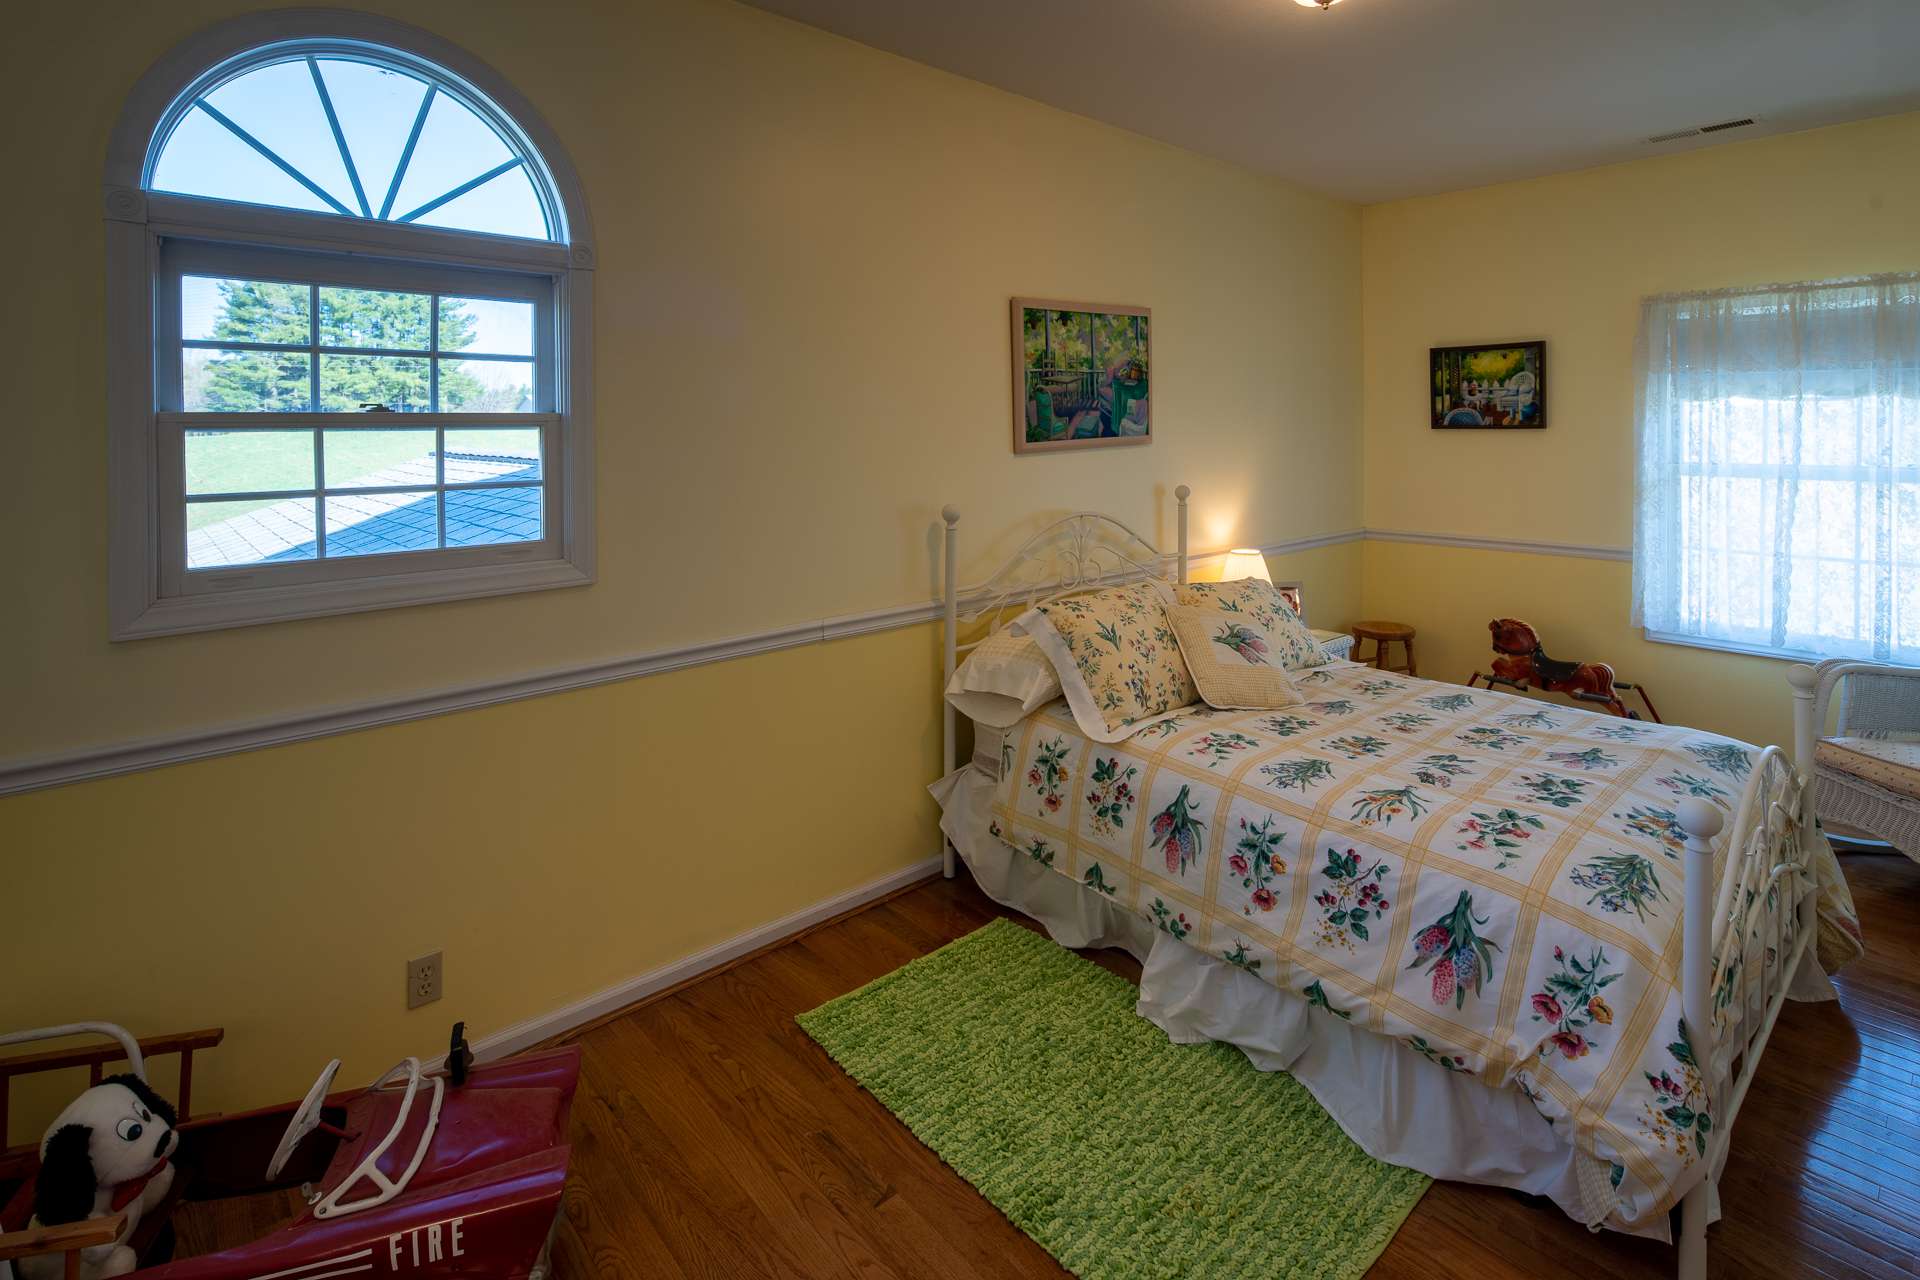 The upper level offers two guest bedrooms and a full bath.